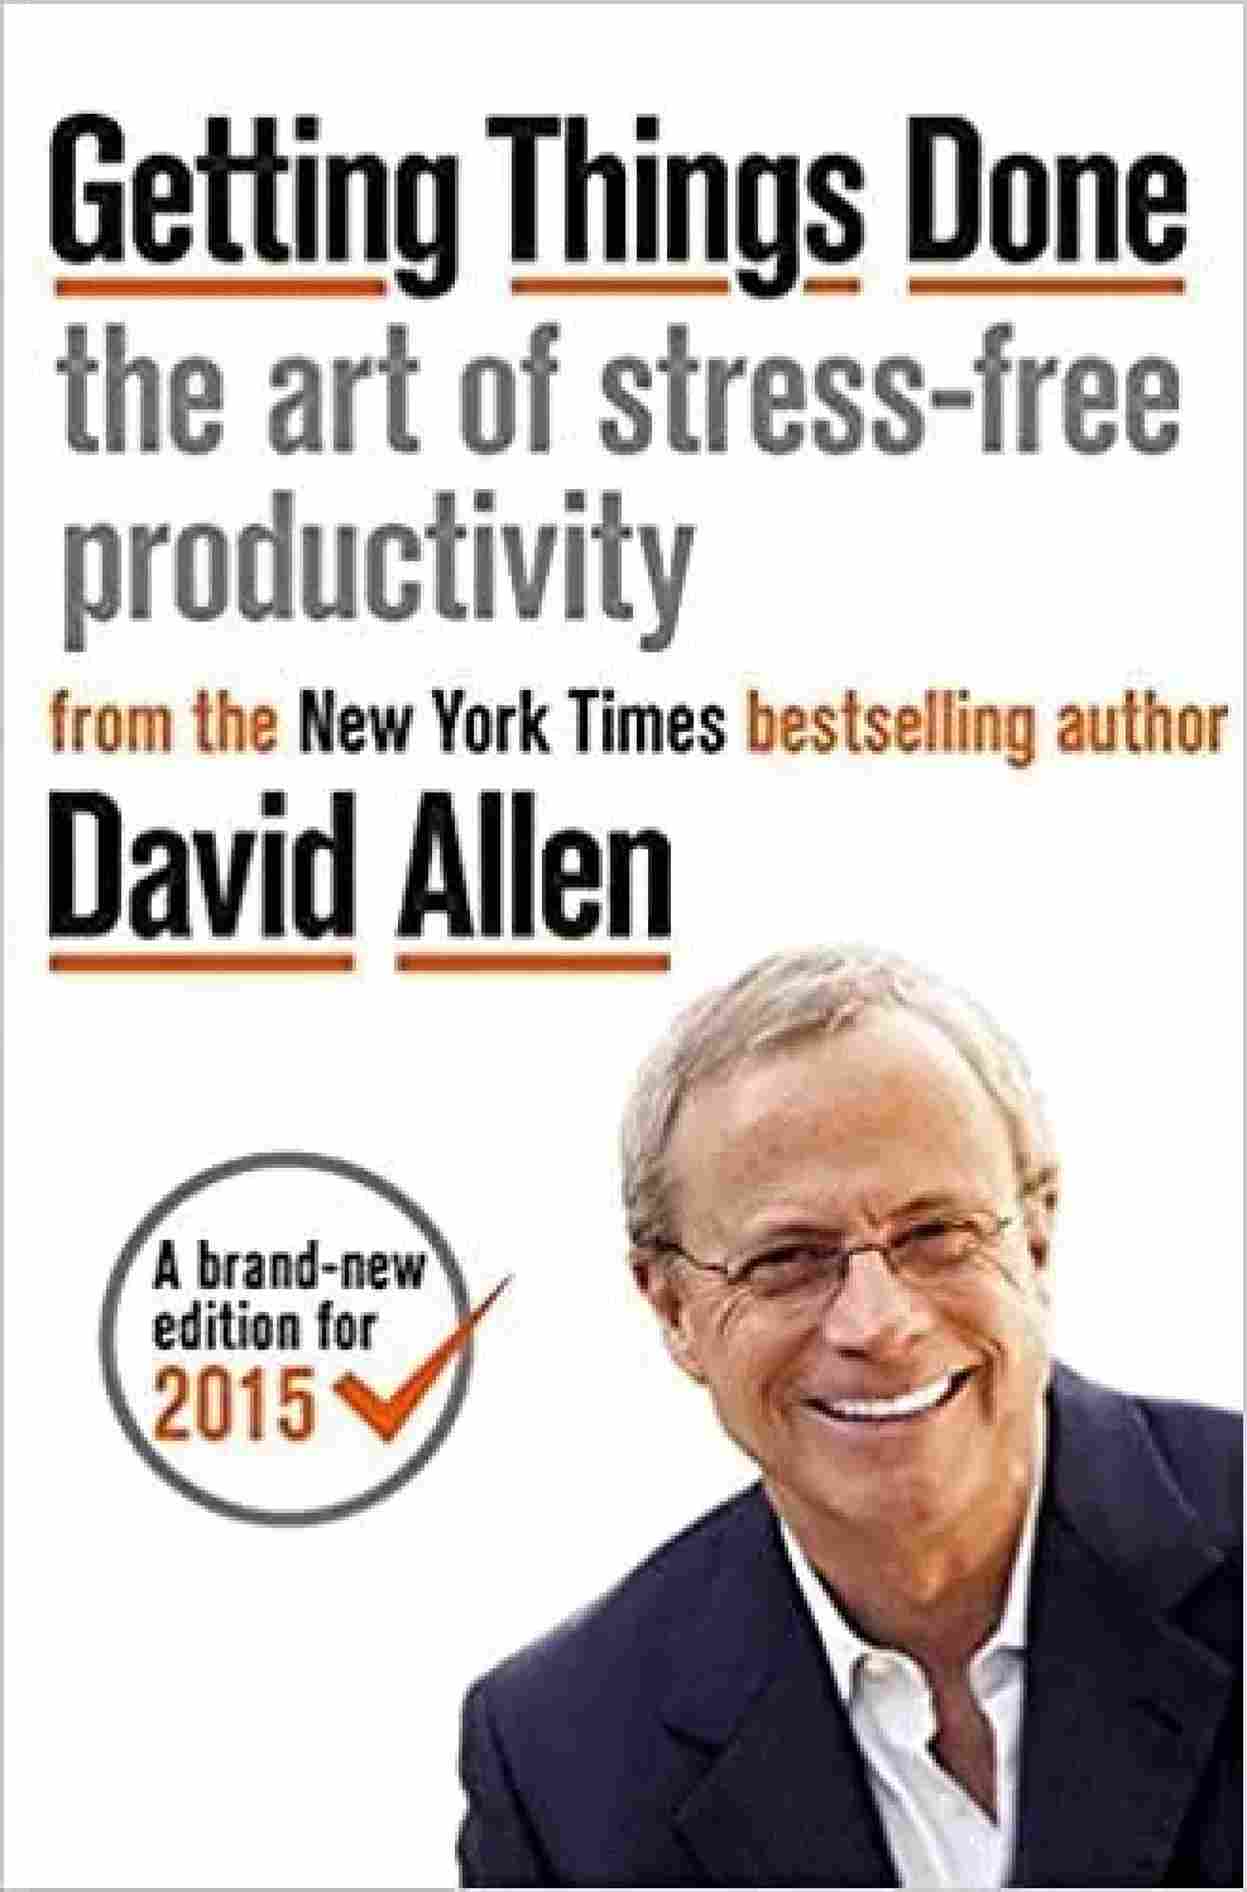 Getting Things Done: The Art of Stress-free Productivity (Paperback) - David Allen - 99BooksStore